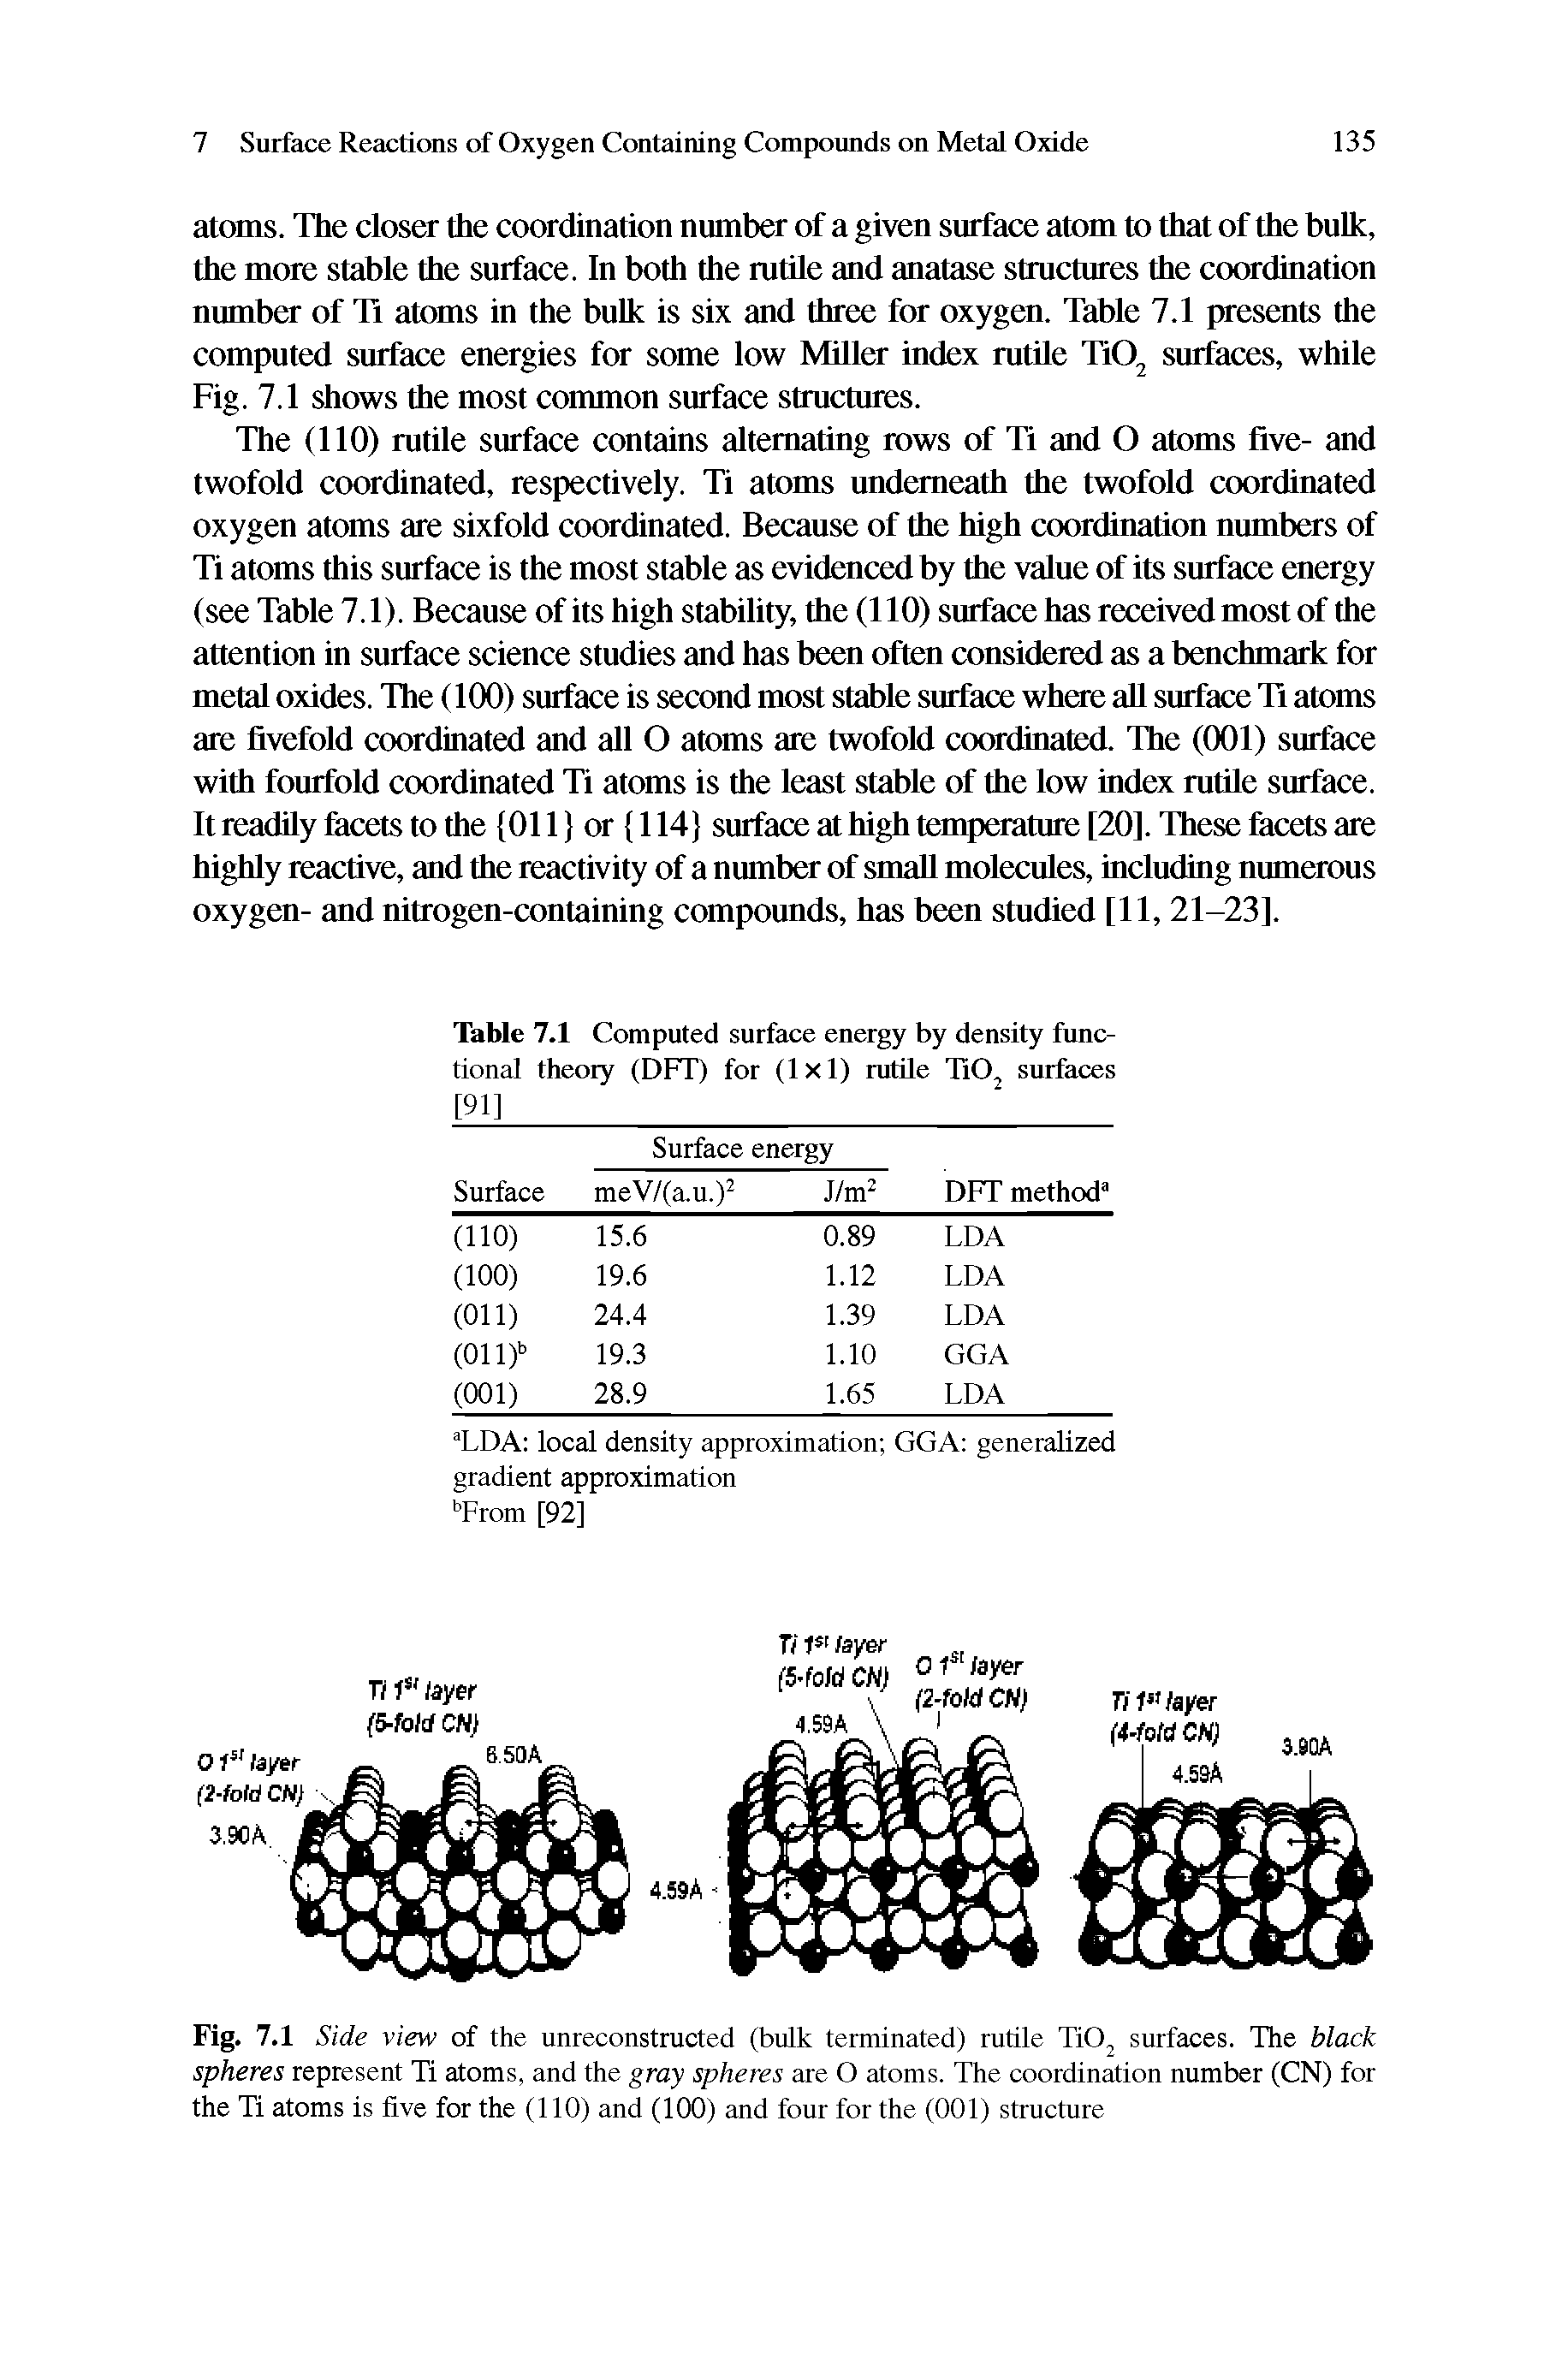 Table 7.1 Computed surface energy by density functional theory (DFT) for (1x1) rutile TiOj surfaces [91]...